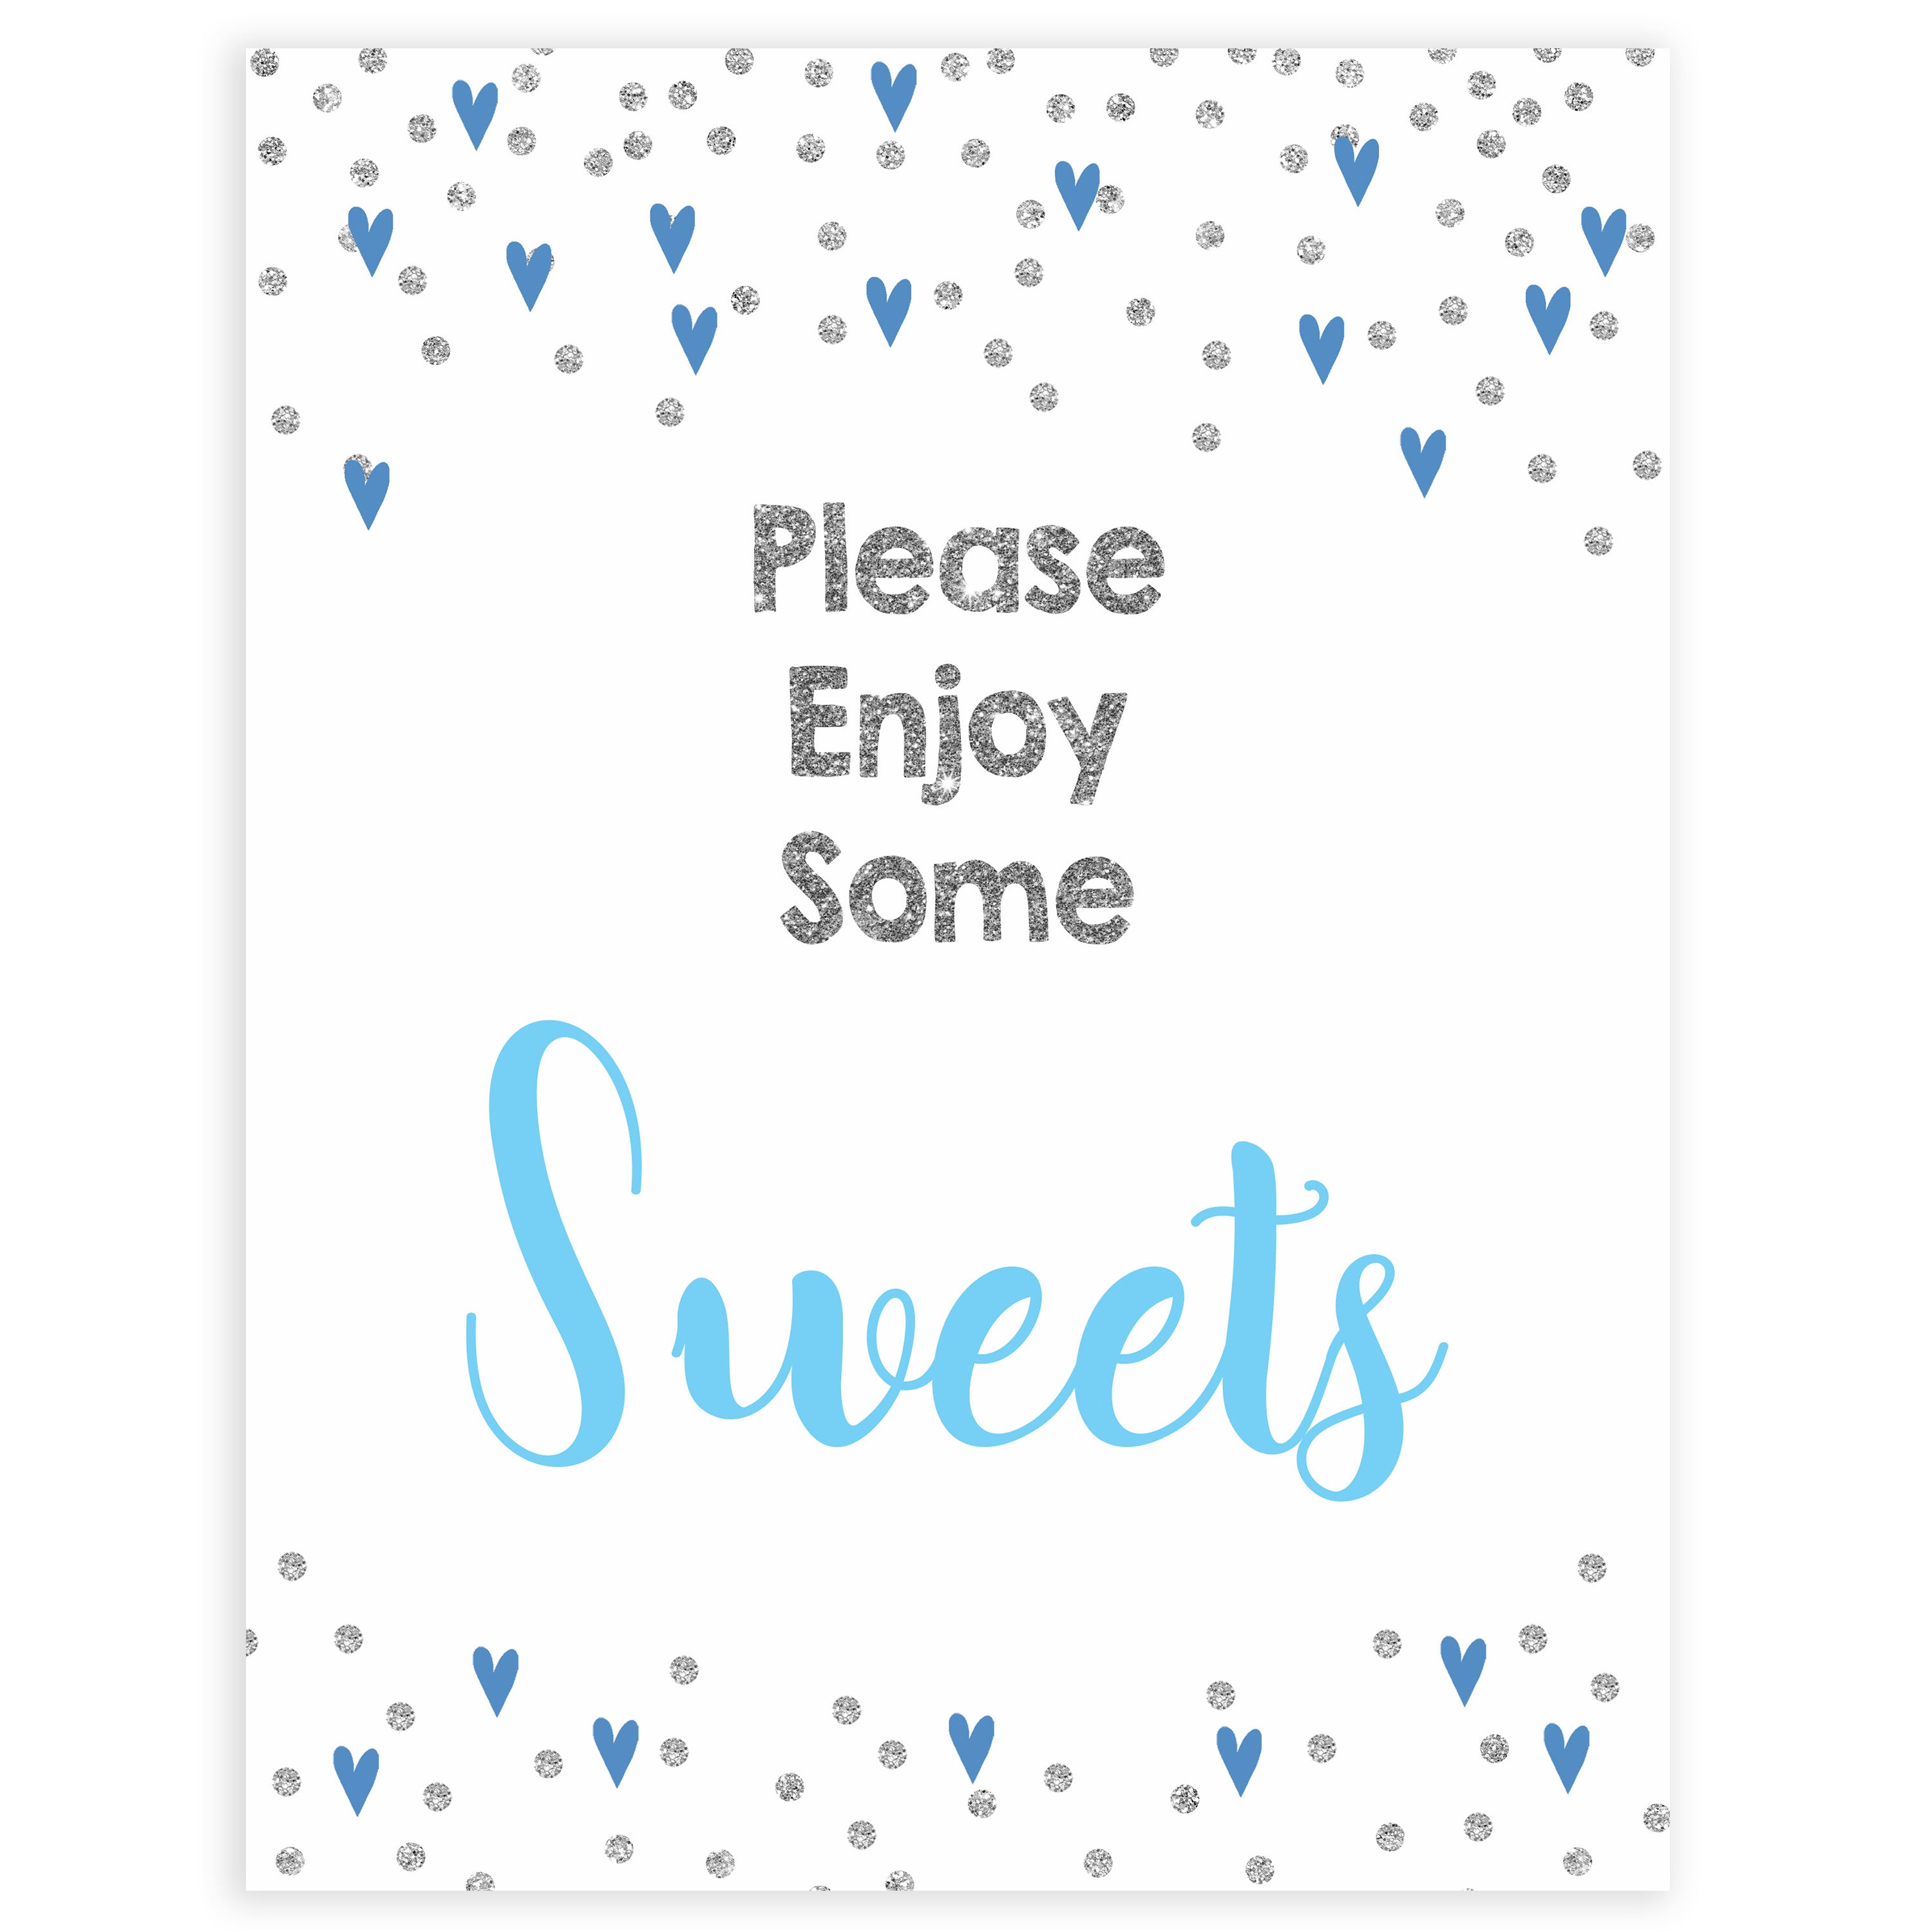 Sweets baby shower table signs, sweets baby signs, Blue hearts baby decor, printable baby table signs, printable baby decor, silver glitter table signs, fun baby signs, blue hearts fun baby table signs